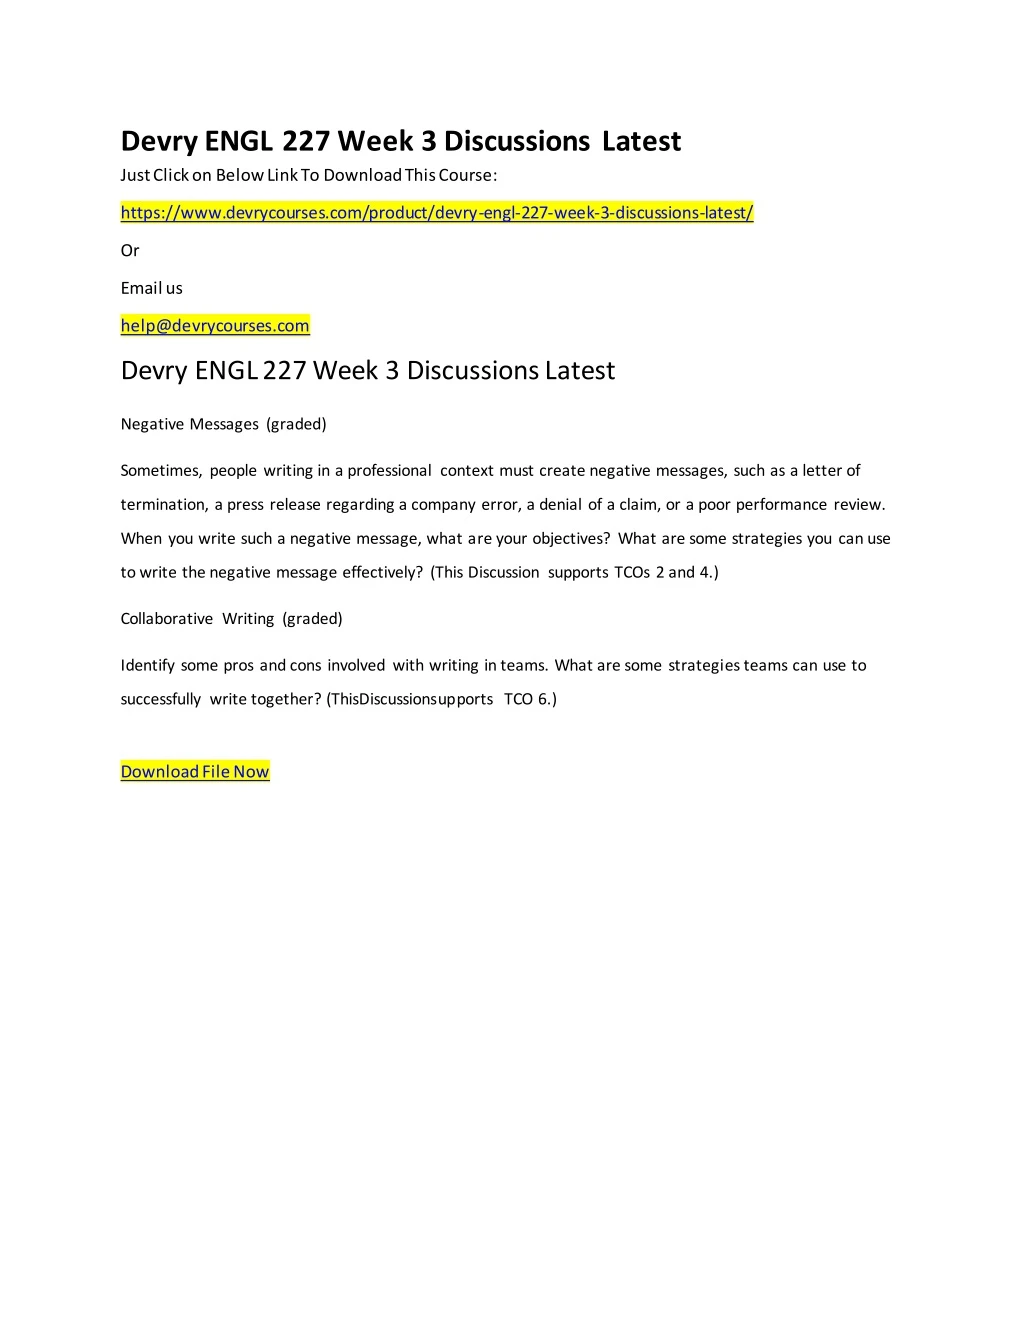 devry engl 227 week 3 discussions latest just